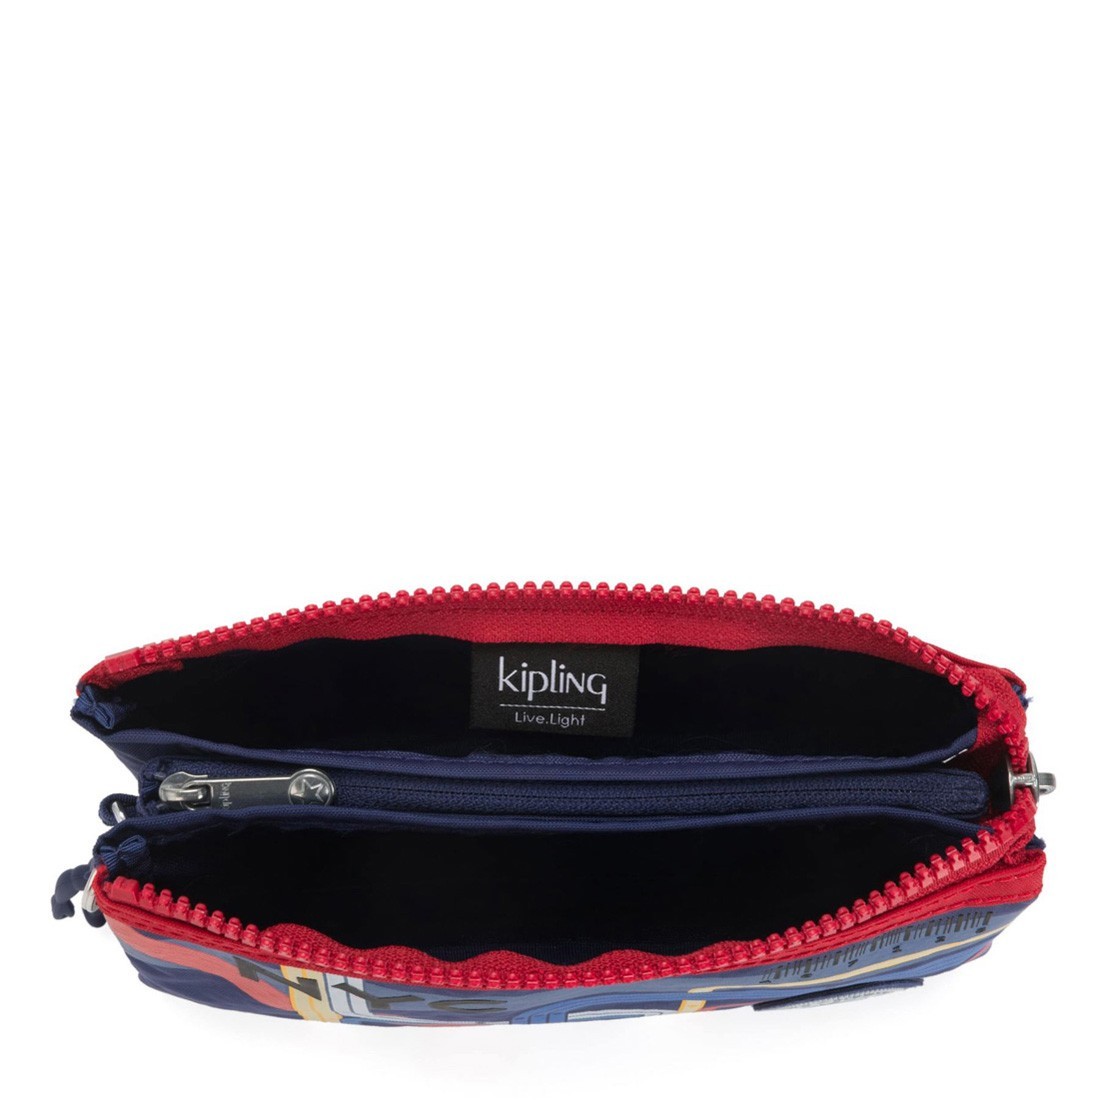 Buy Kipling Creativity L Large Multi-Use Pouch - NYC Code - Kipling,  delivered to your home | The Outfit